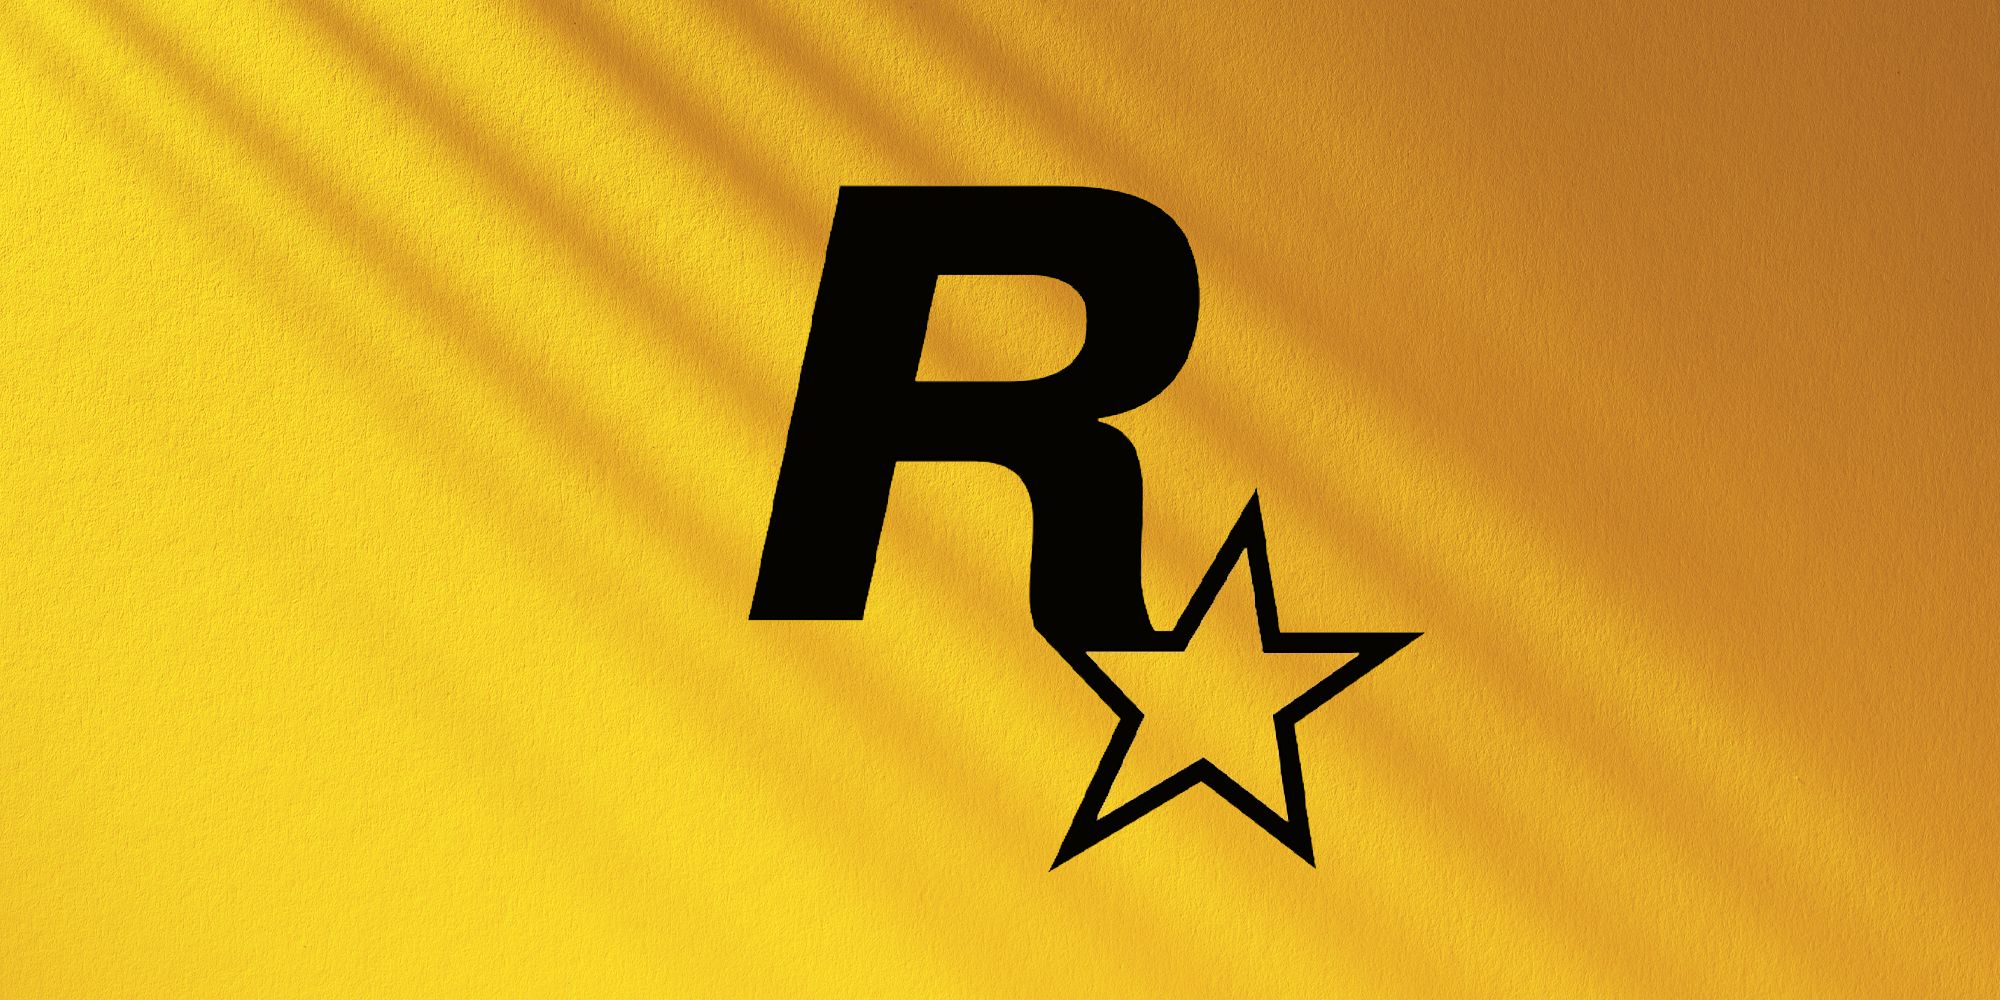 NEWS Rockstar logo over yellow background with light beams overlayed-1